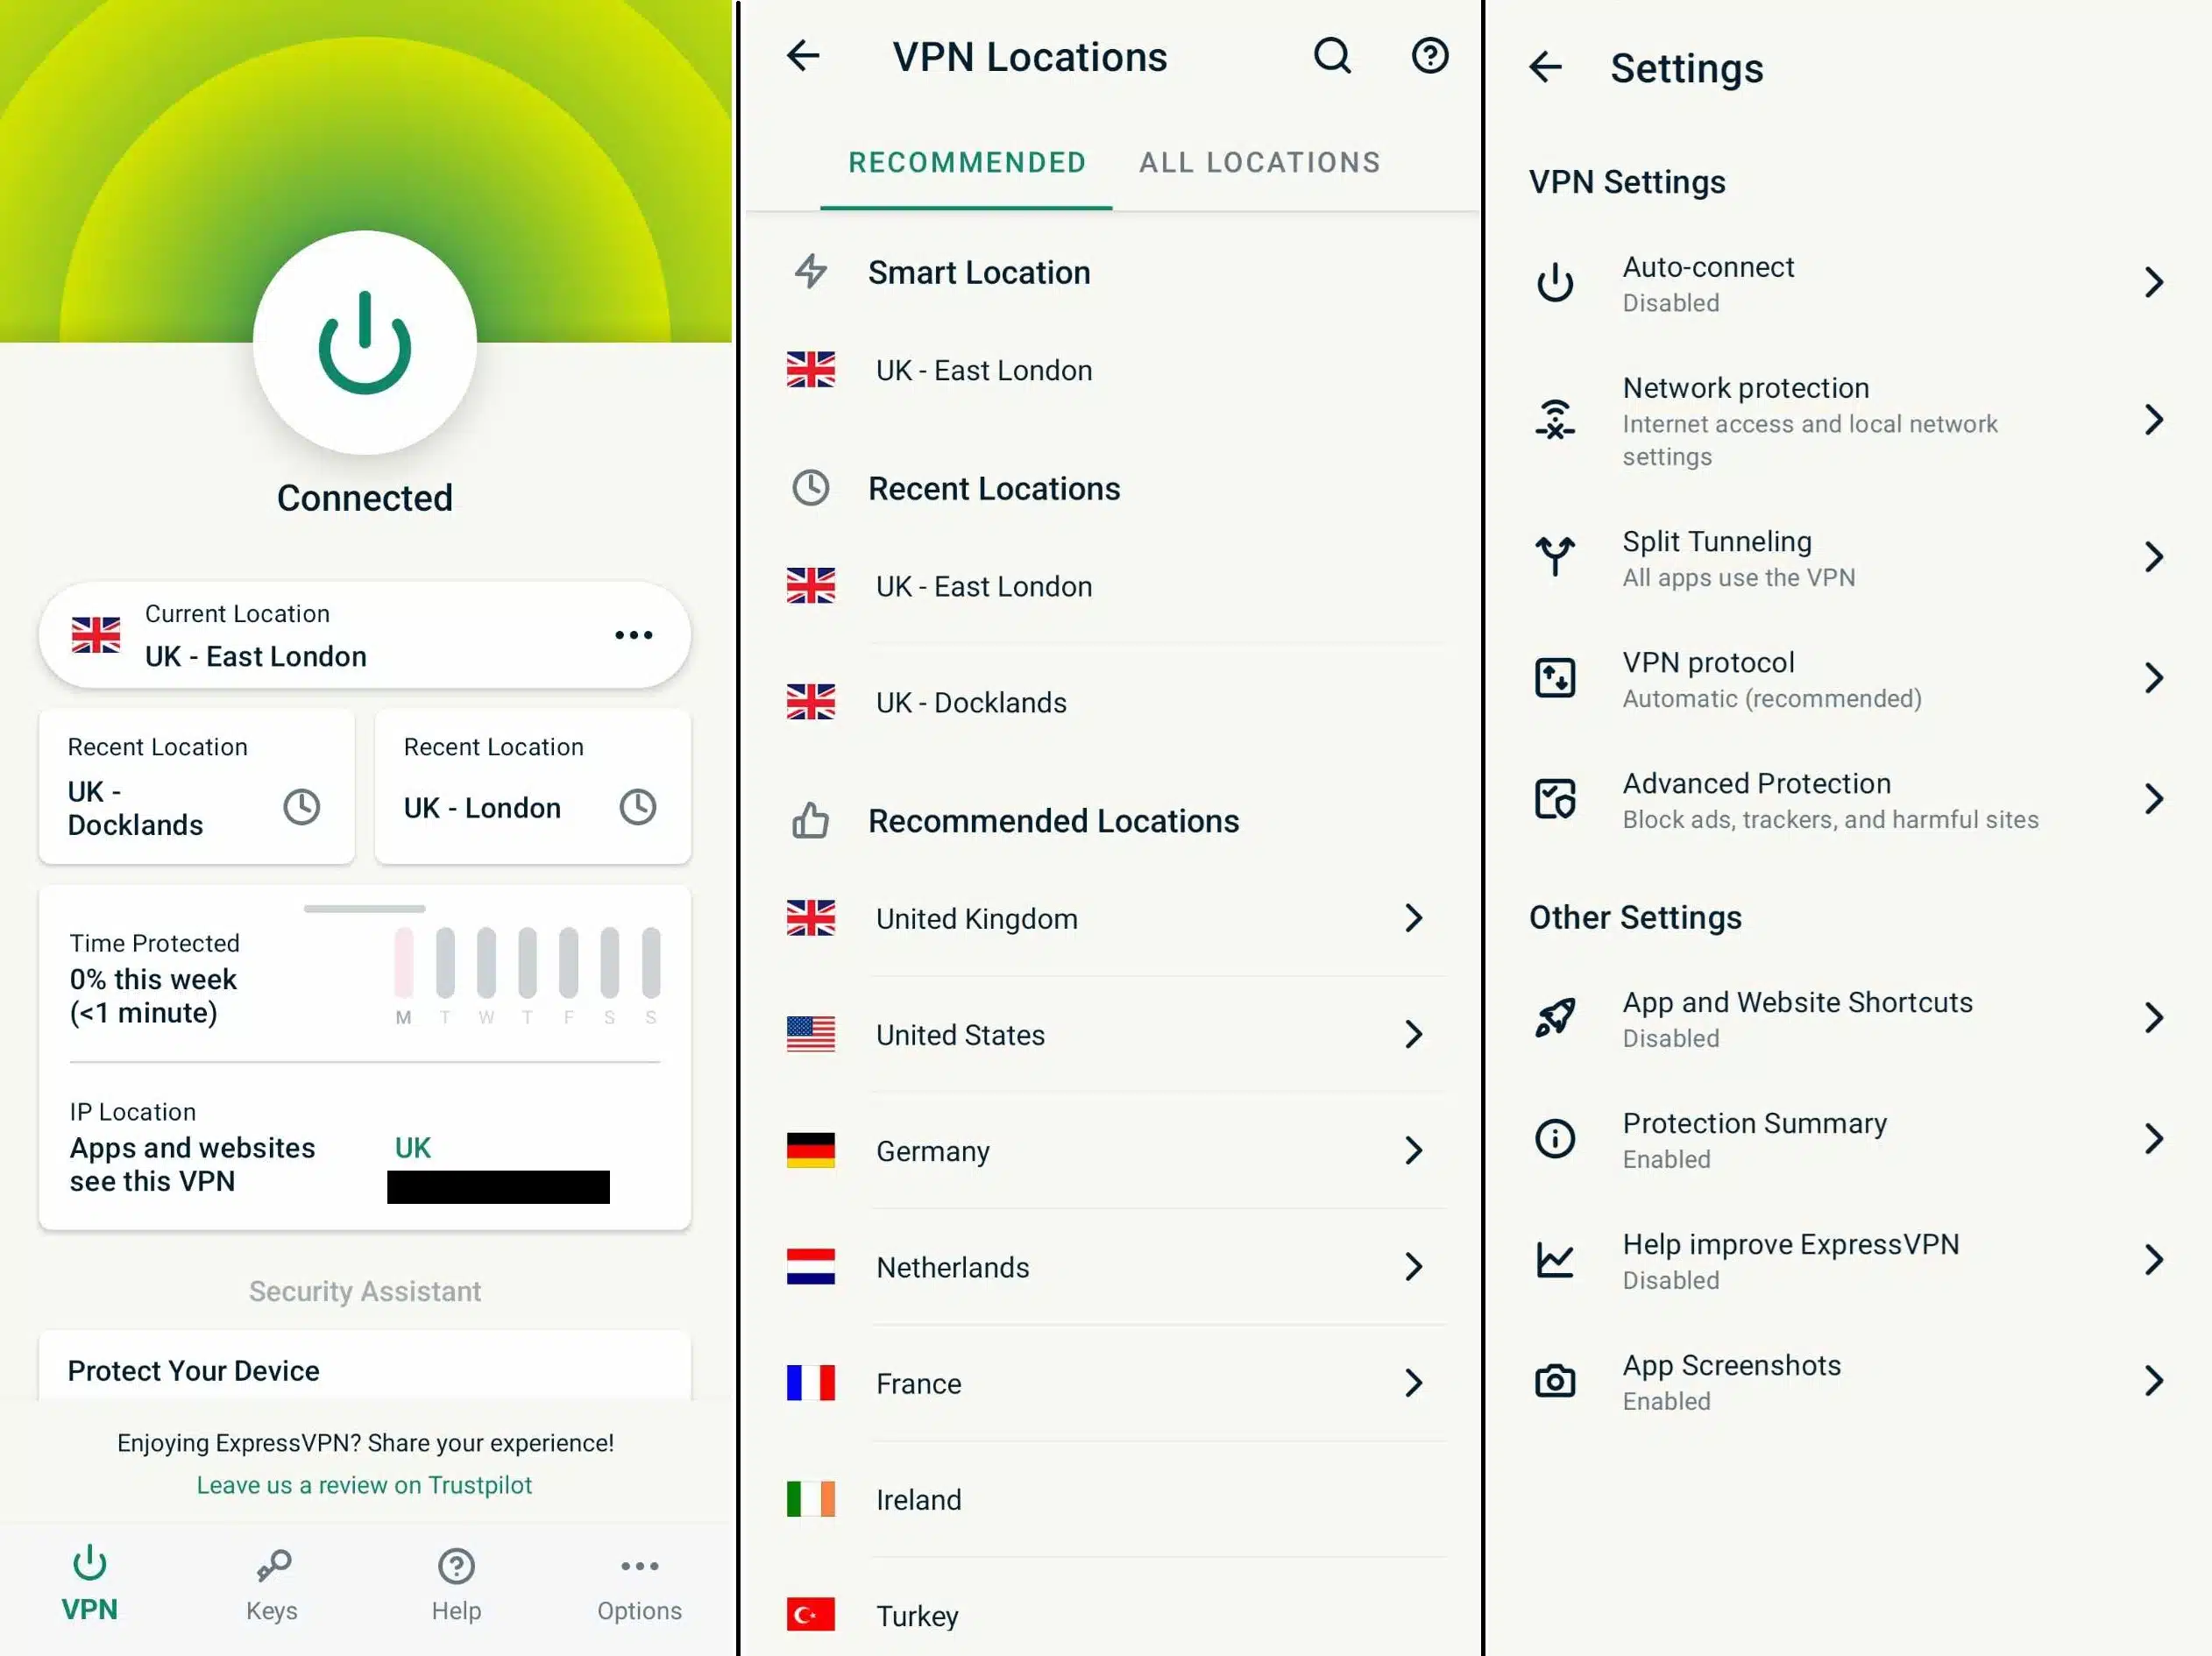 Screenshot of ExpressVPN's Android app - main screen, location selection, and settings pages